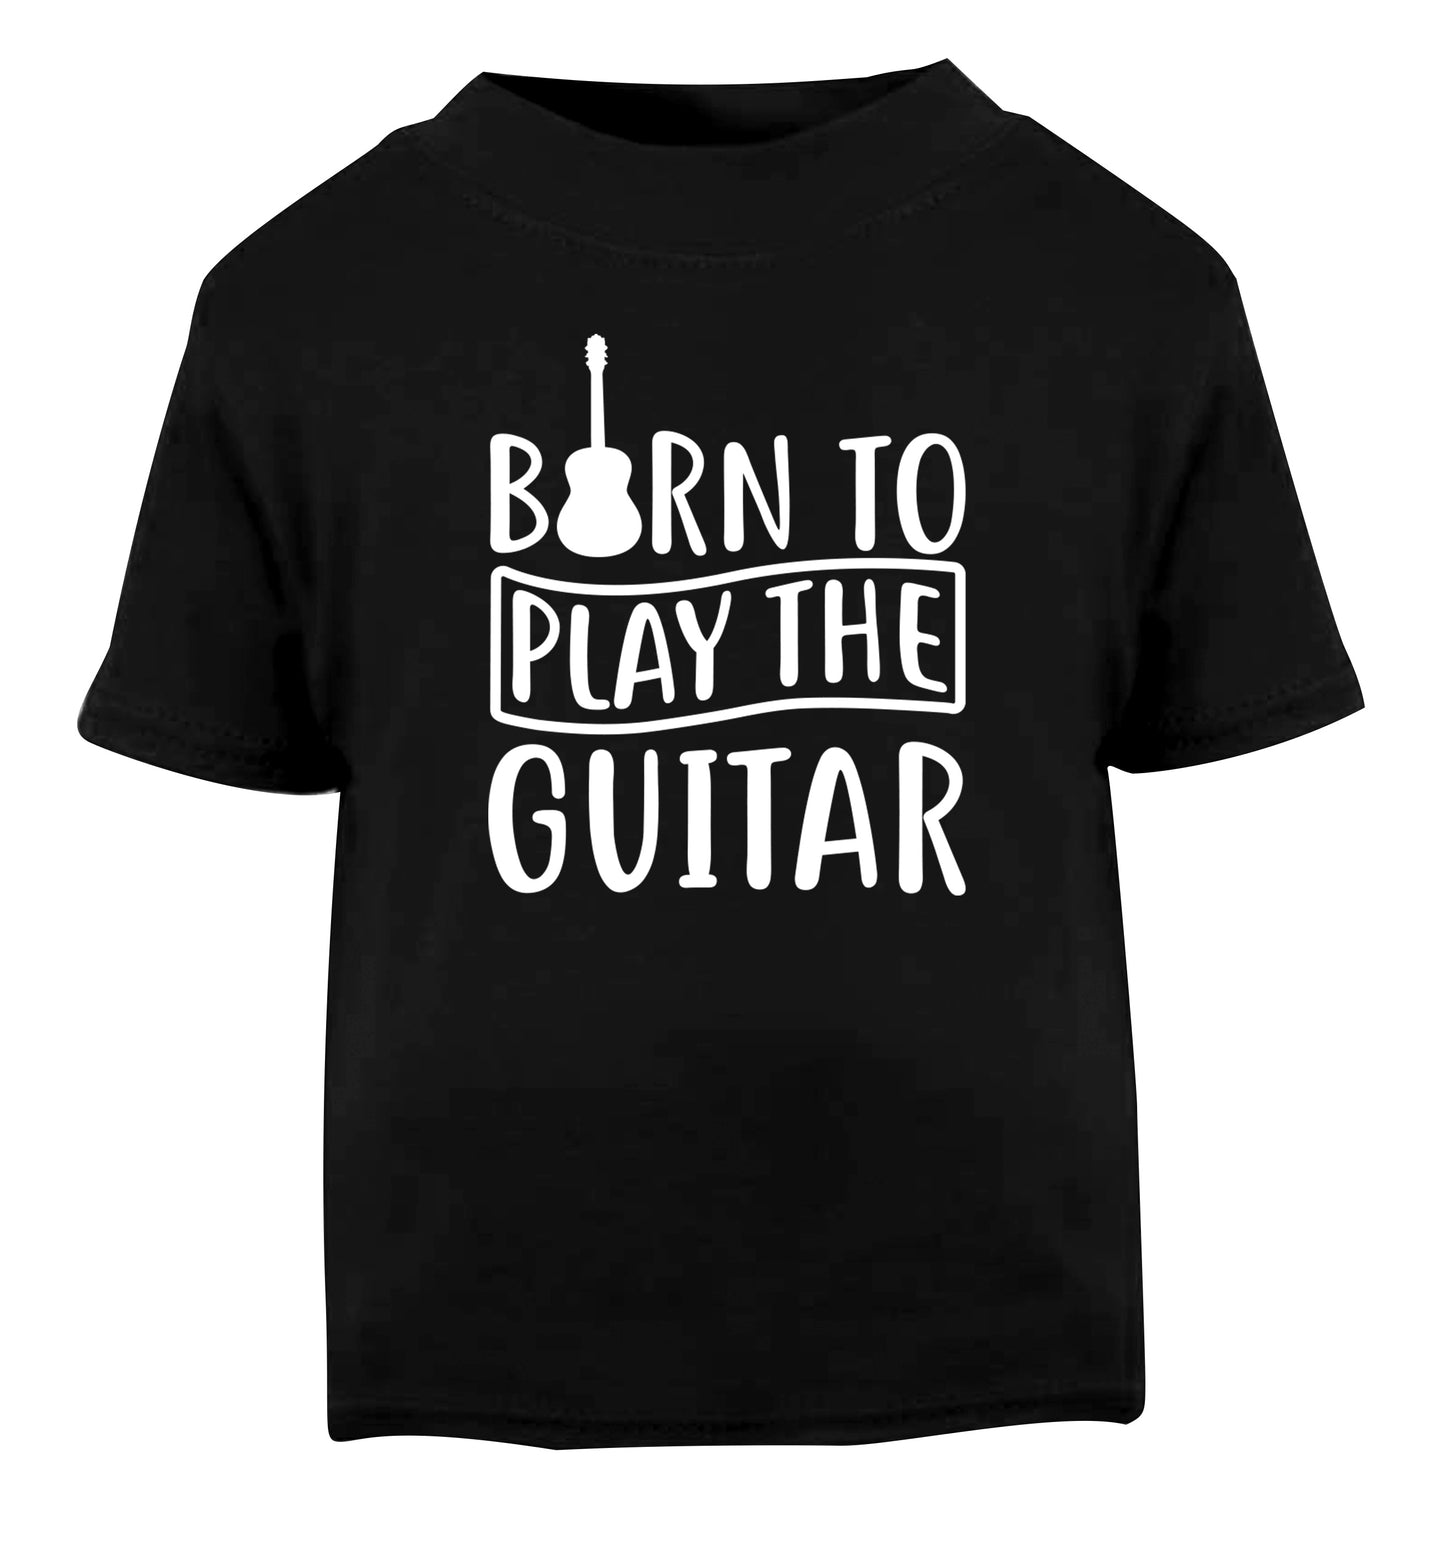 Born to play the guitar Black Baby Toddler Tshirt 2 years